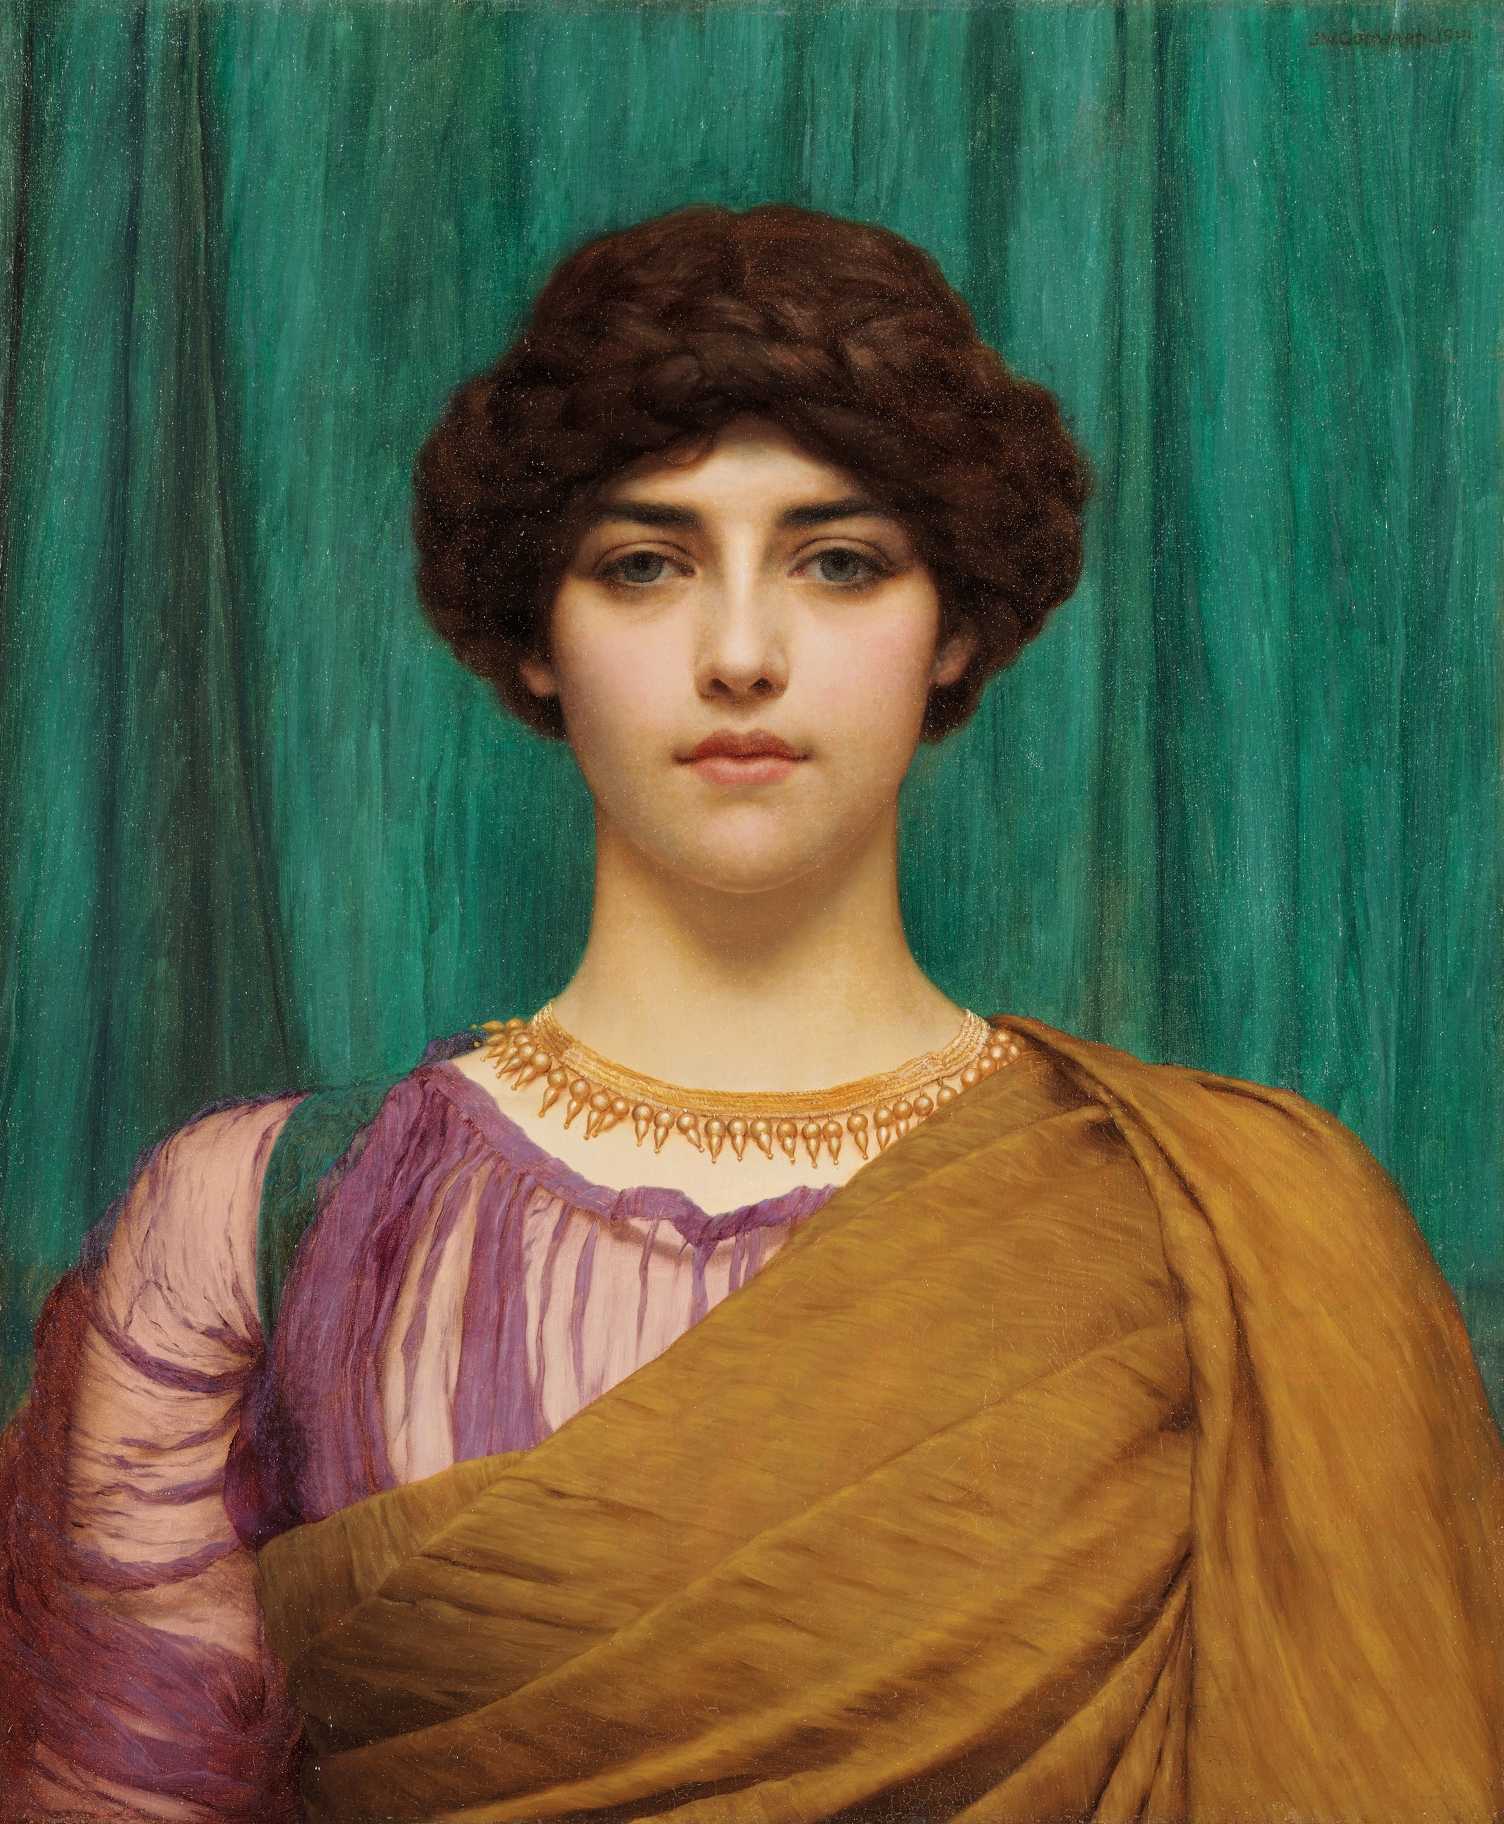 Find out more about John William Godward - A Pompeian Lady